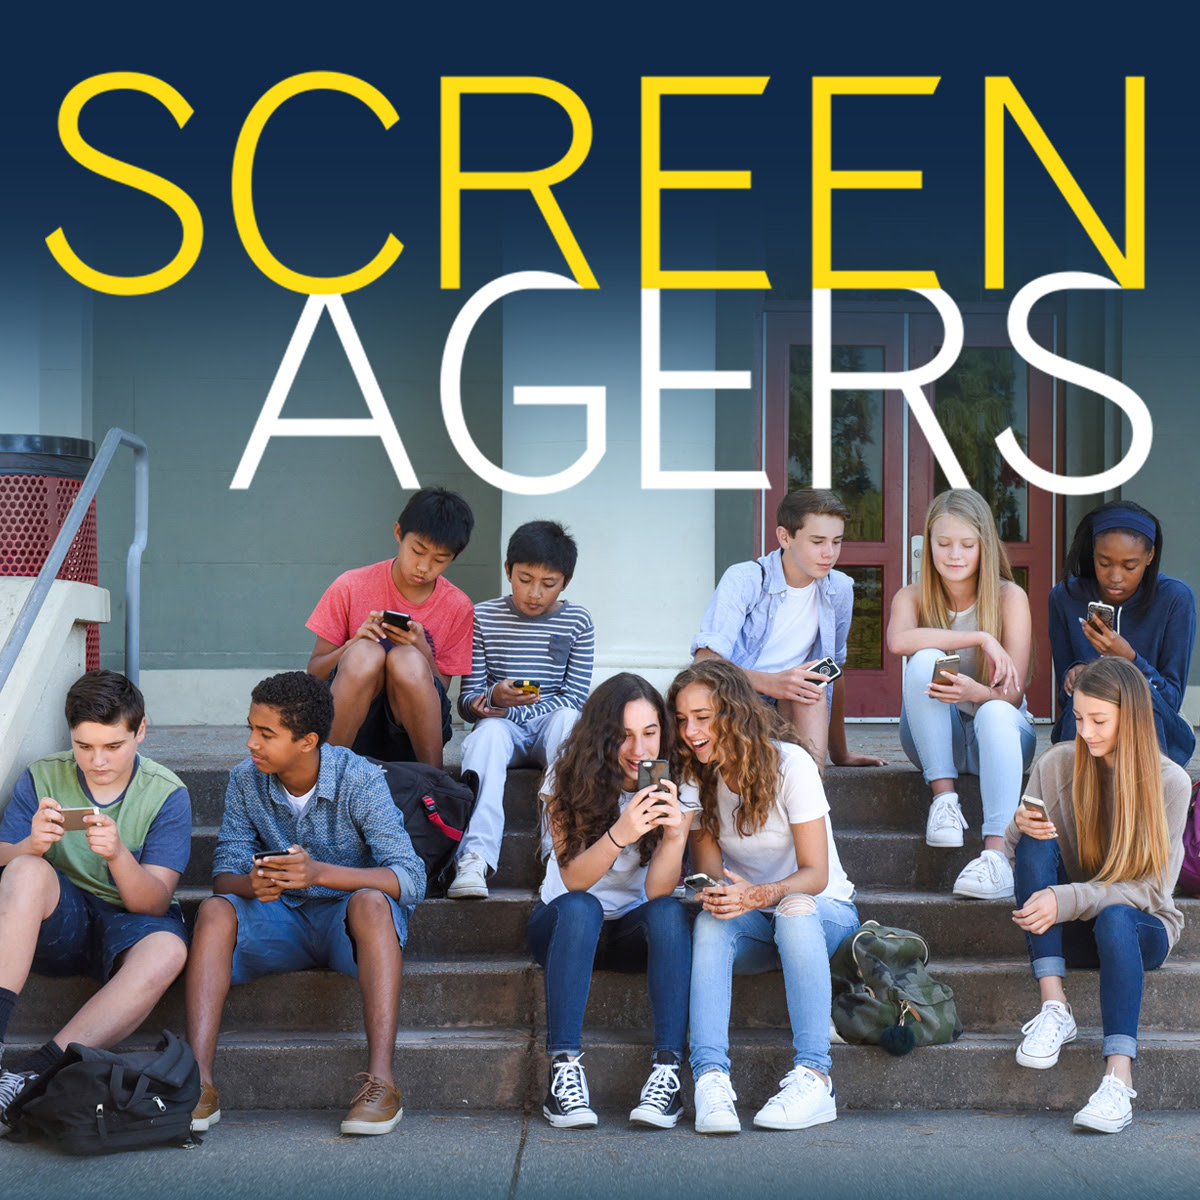 Screenagers Film Presented By Temple Bible Church